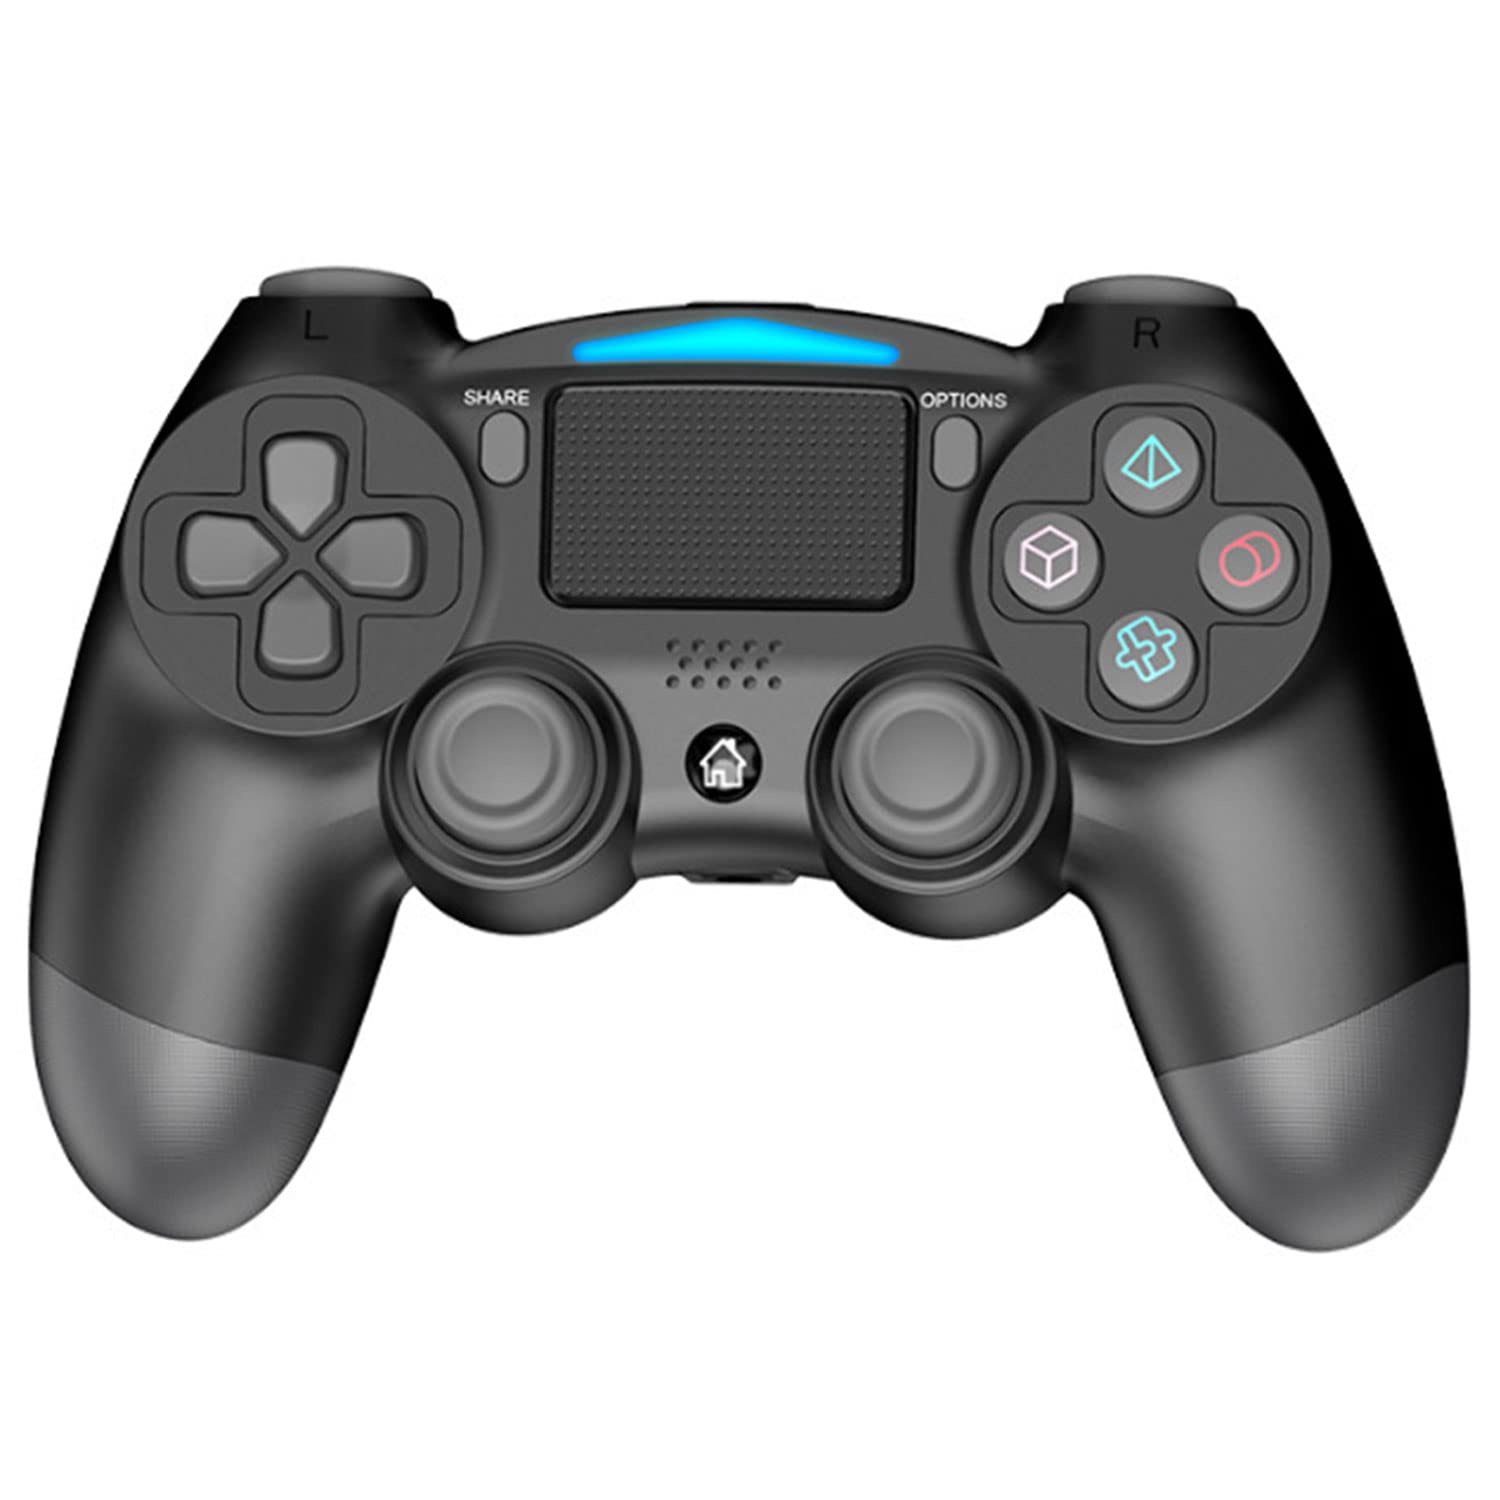 PS4 Dualshock 4 controller connected to a PC via USB cable